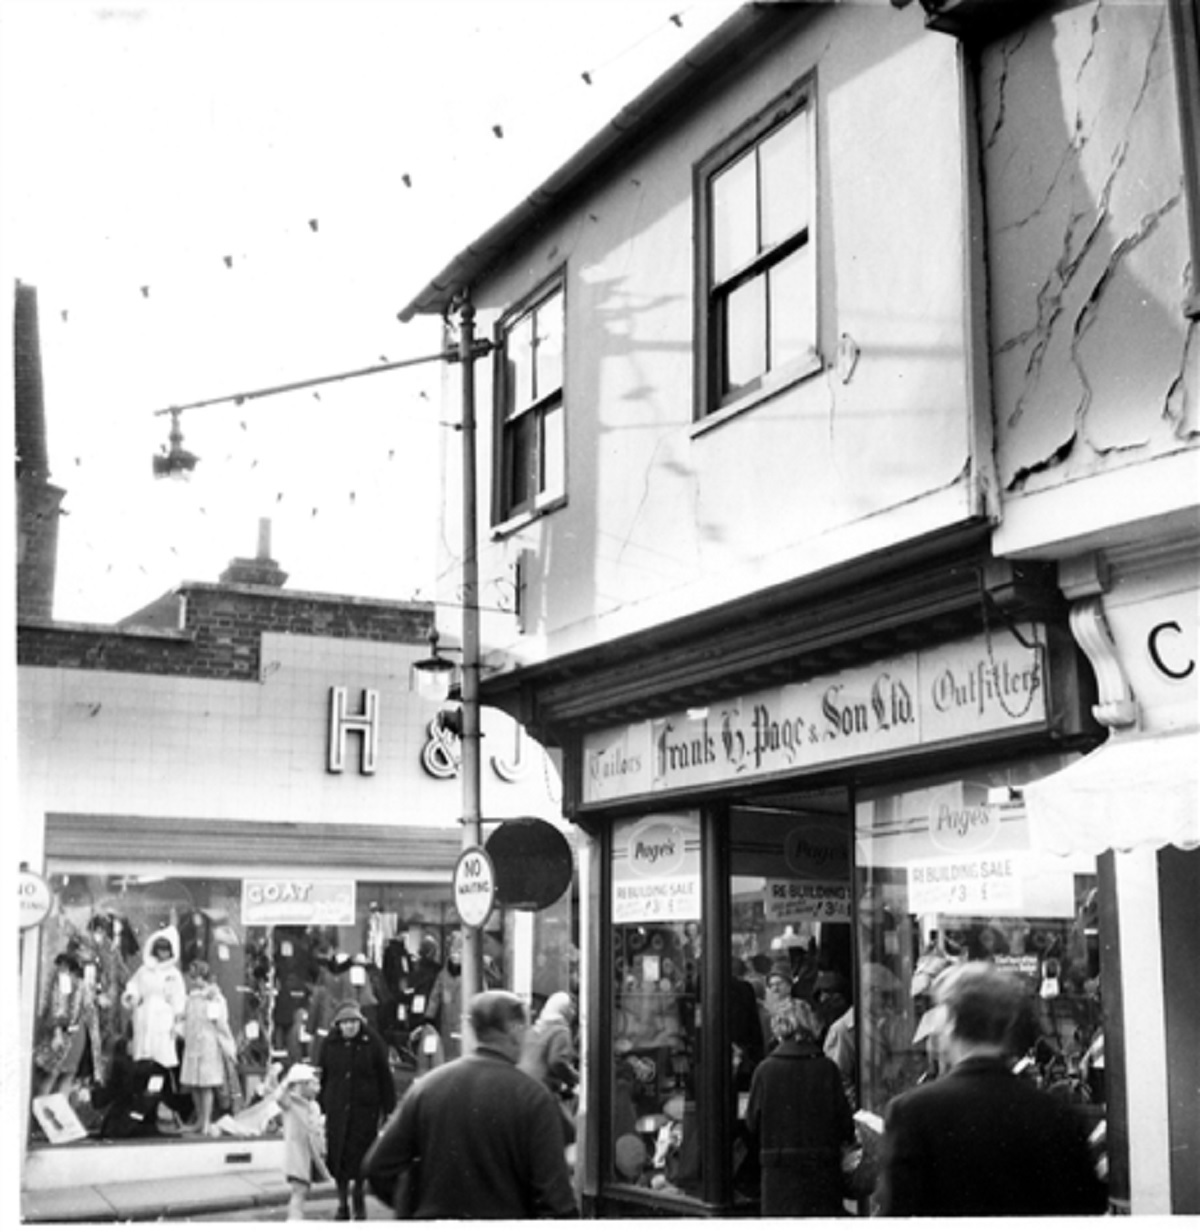 Looking the part - Frank H Page and Son was an outfitters and tailors in Long Wyre Street, at the junction with Eld Lane. This picture was taken in the 1960s